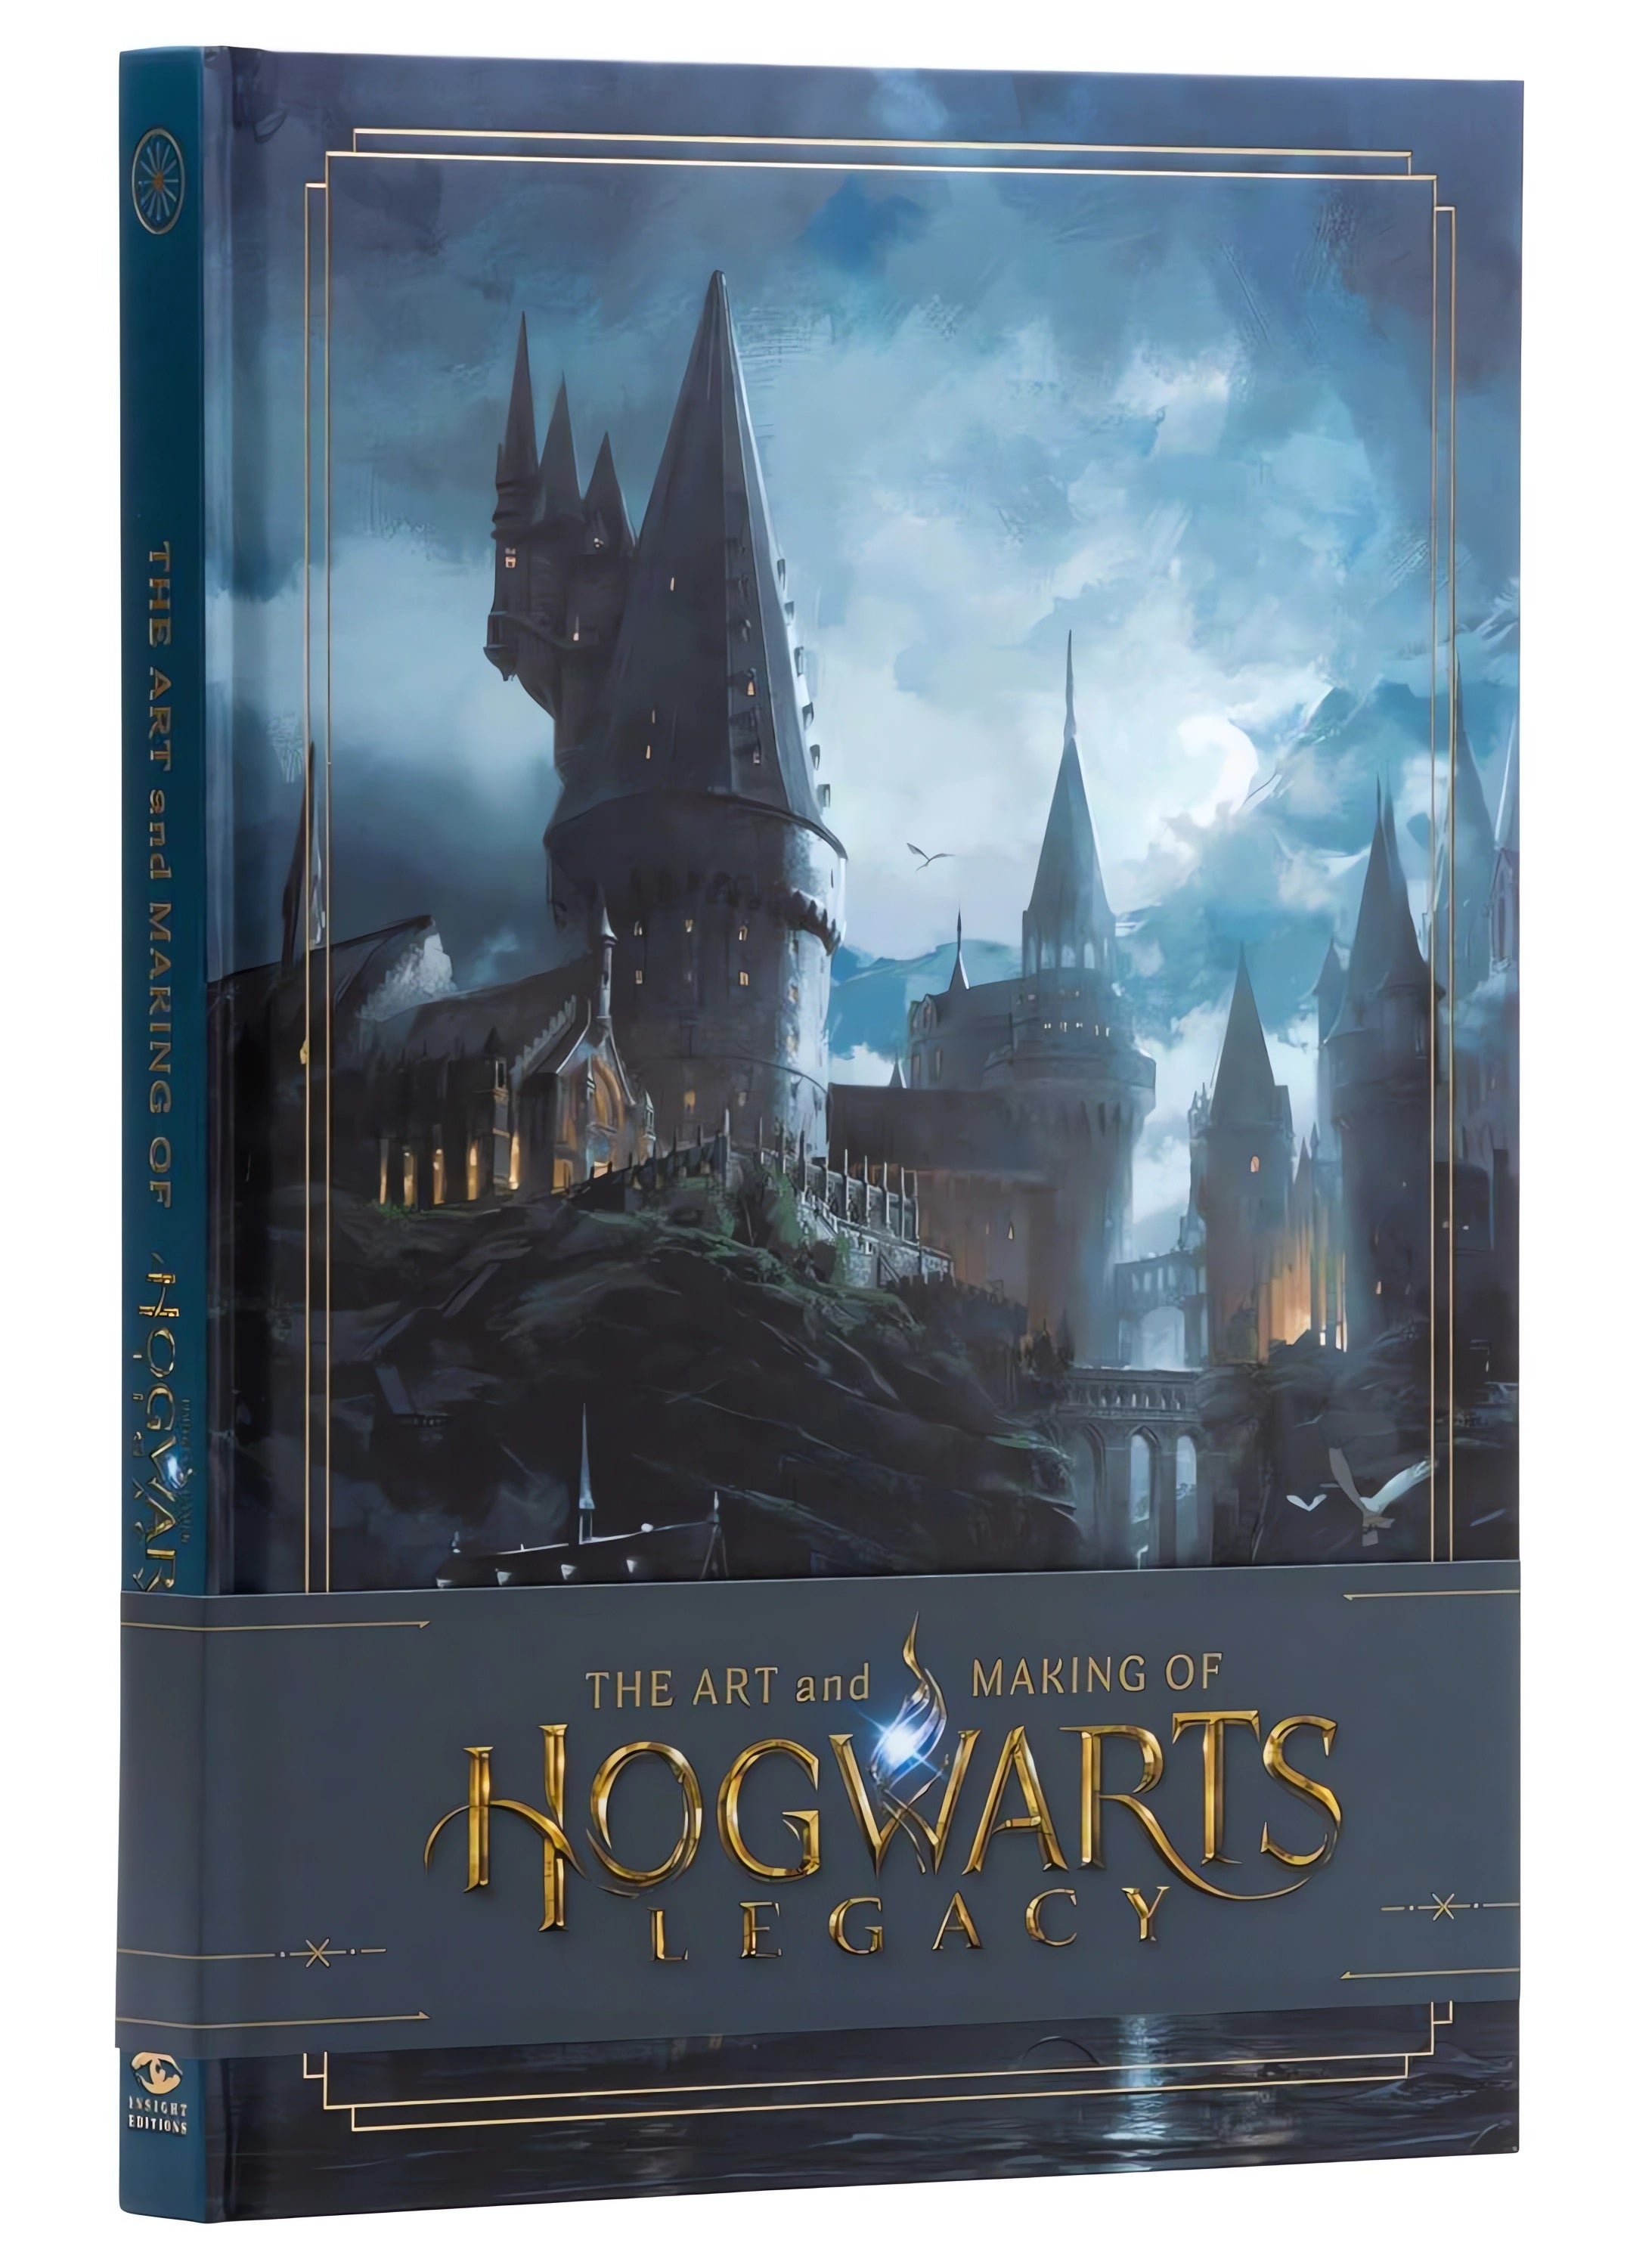 The Art and Making of Hogwarts Legacy Hardcover